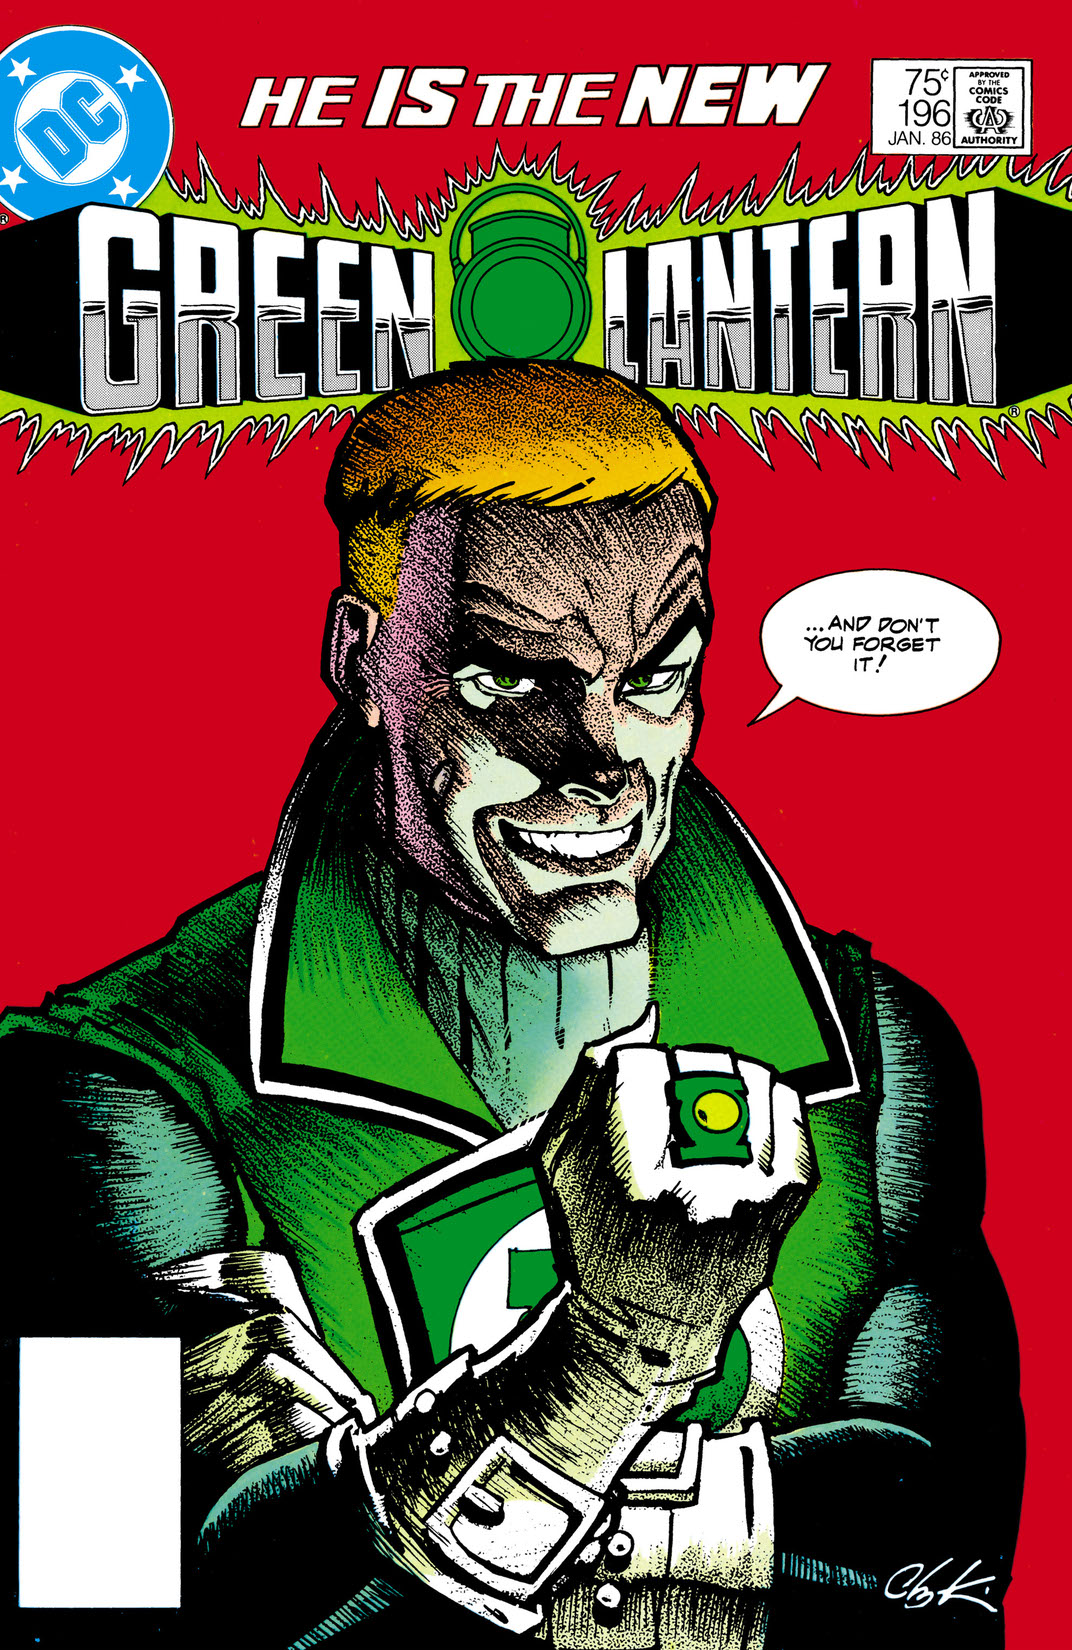 Green Lantern (1960-) #196 preview images